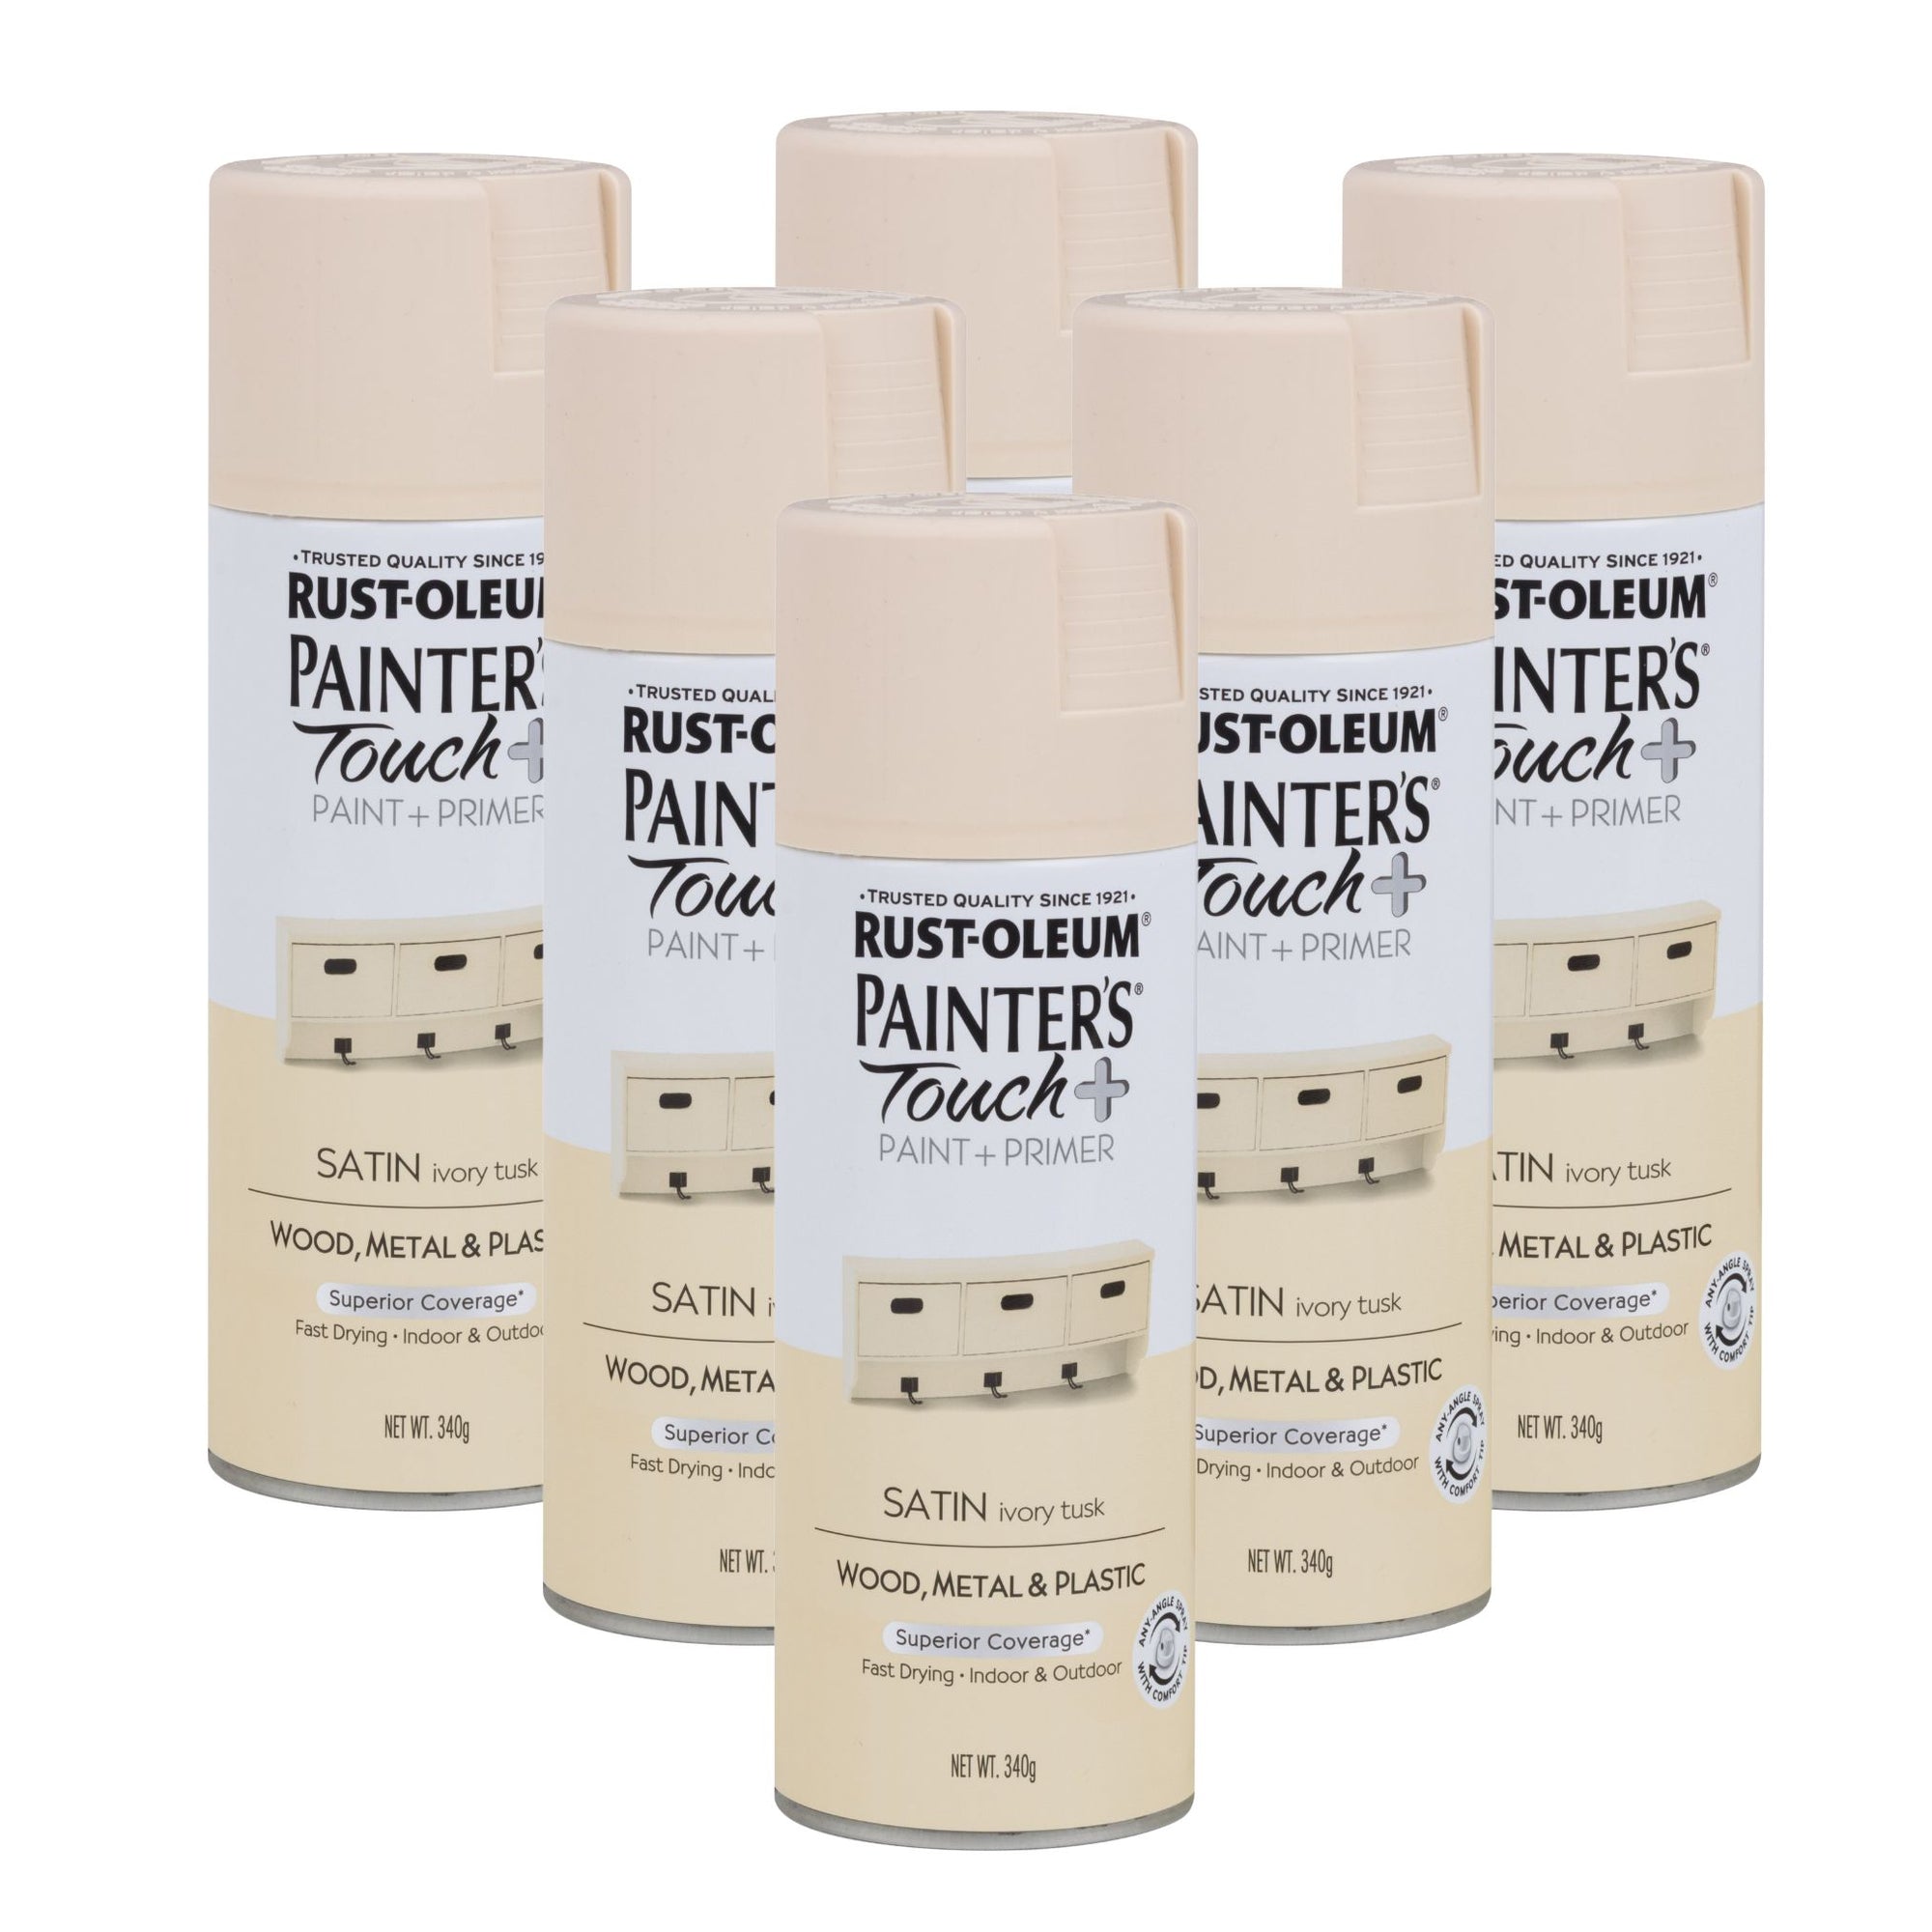 Rust-Oleum Painter's Touch Paint & Primer Spray Paint | Satin Ivory Tusk  (6 Cans) - South East Clearance Centre